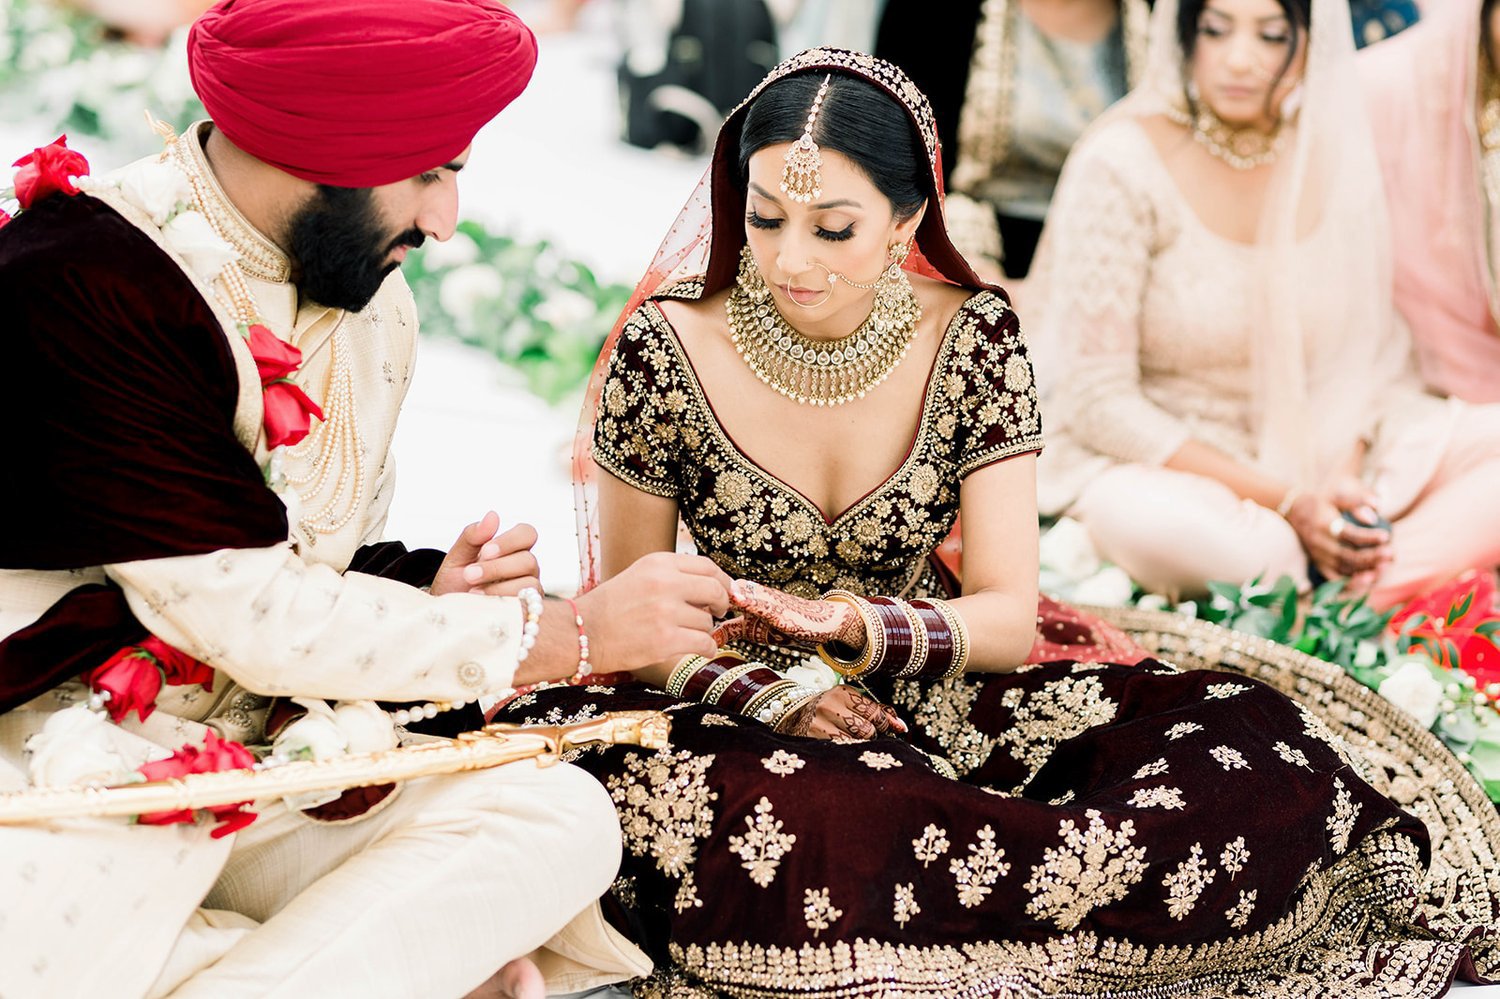 An indian bride and groom in traditional wedding attire exchange wedding bands.